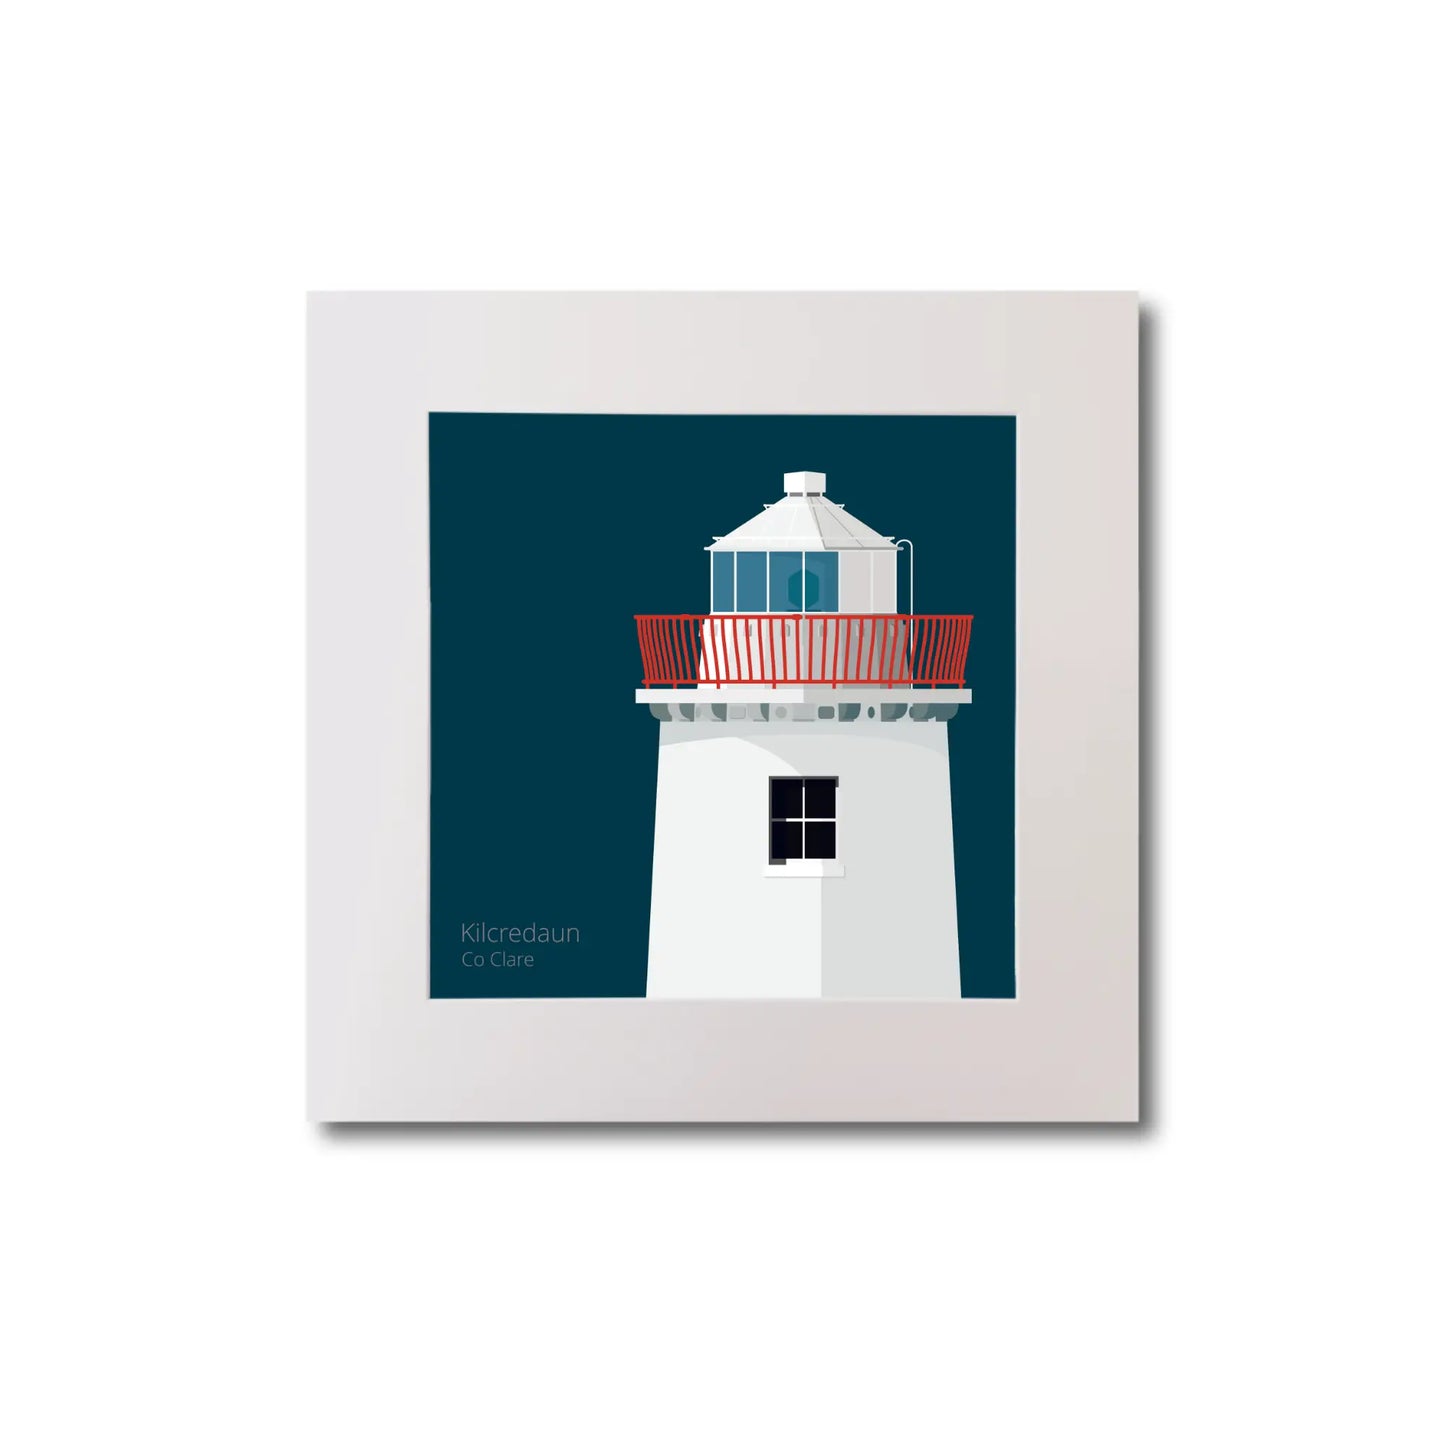 Illustration of Kilcredaun lighthouse on a midnight blue background, mounted and measuring 20x20cm.